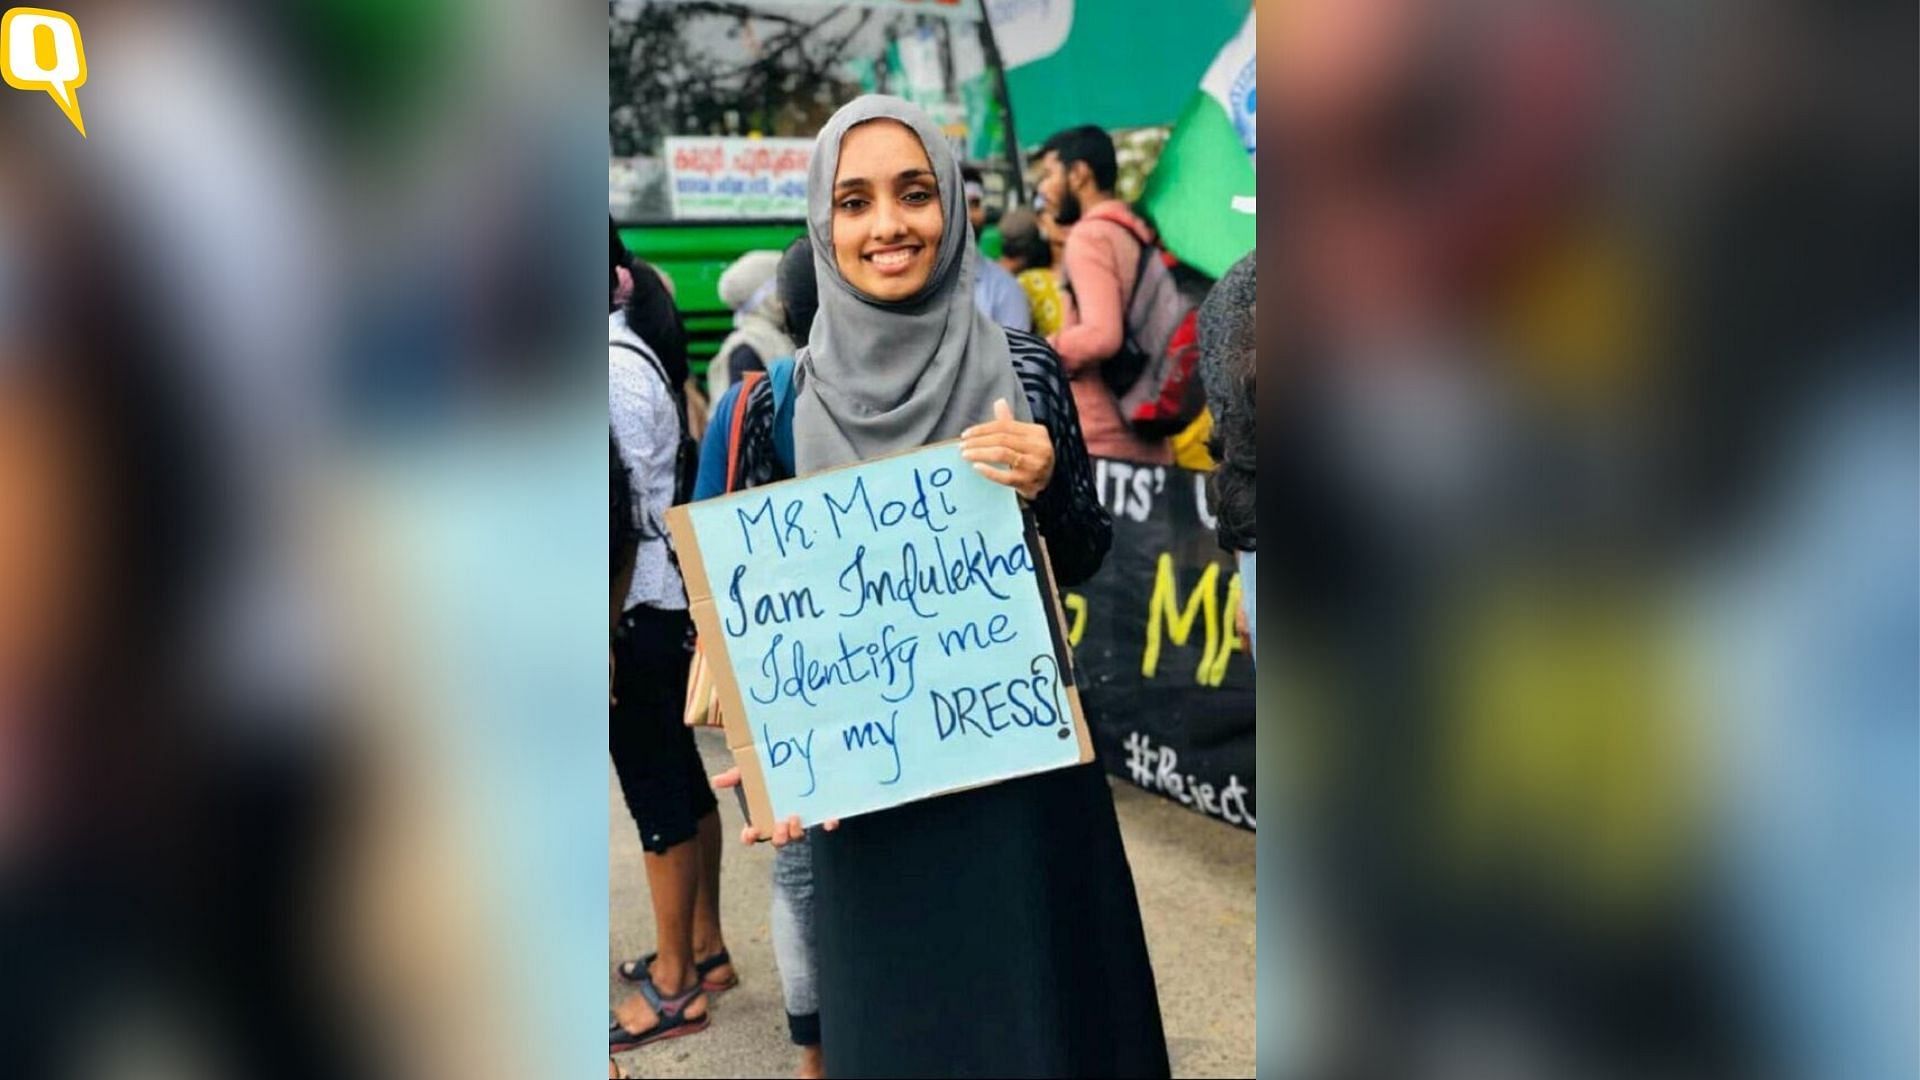 Photo of  Indulekha wearing hijab, holding a placard that read: ‘Identify me by my dress?’ went viral.